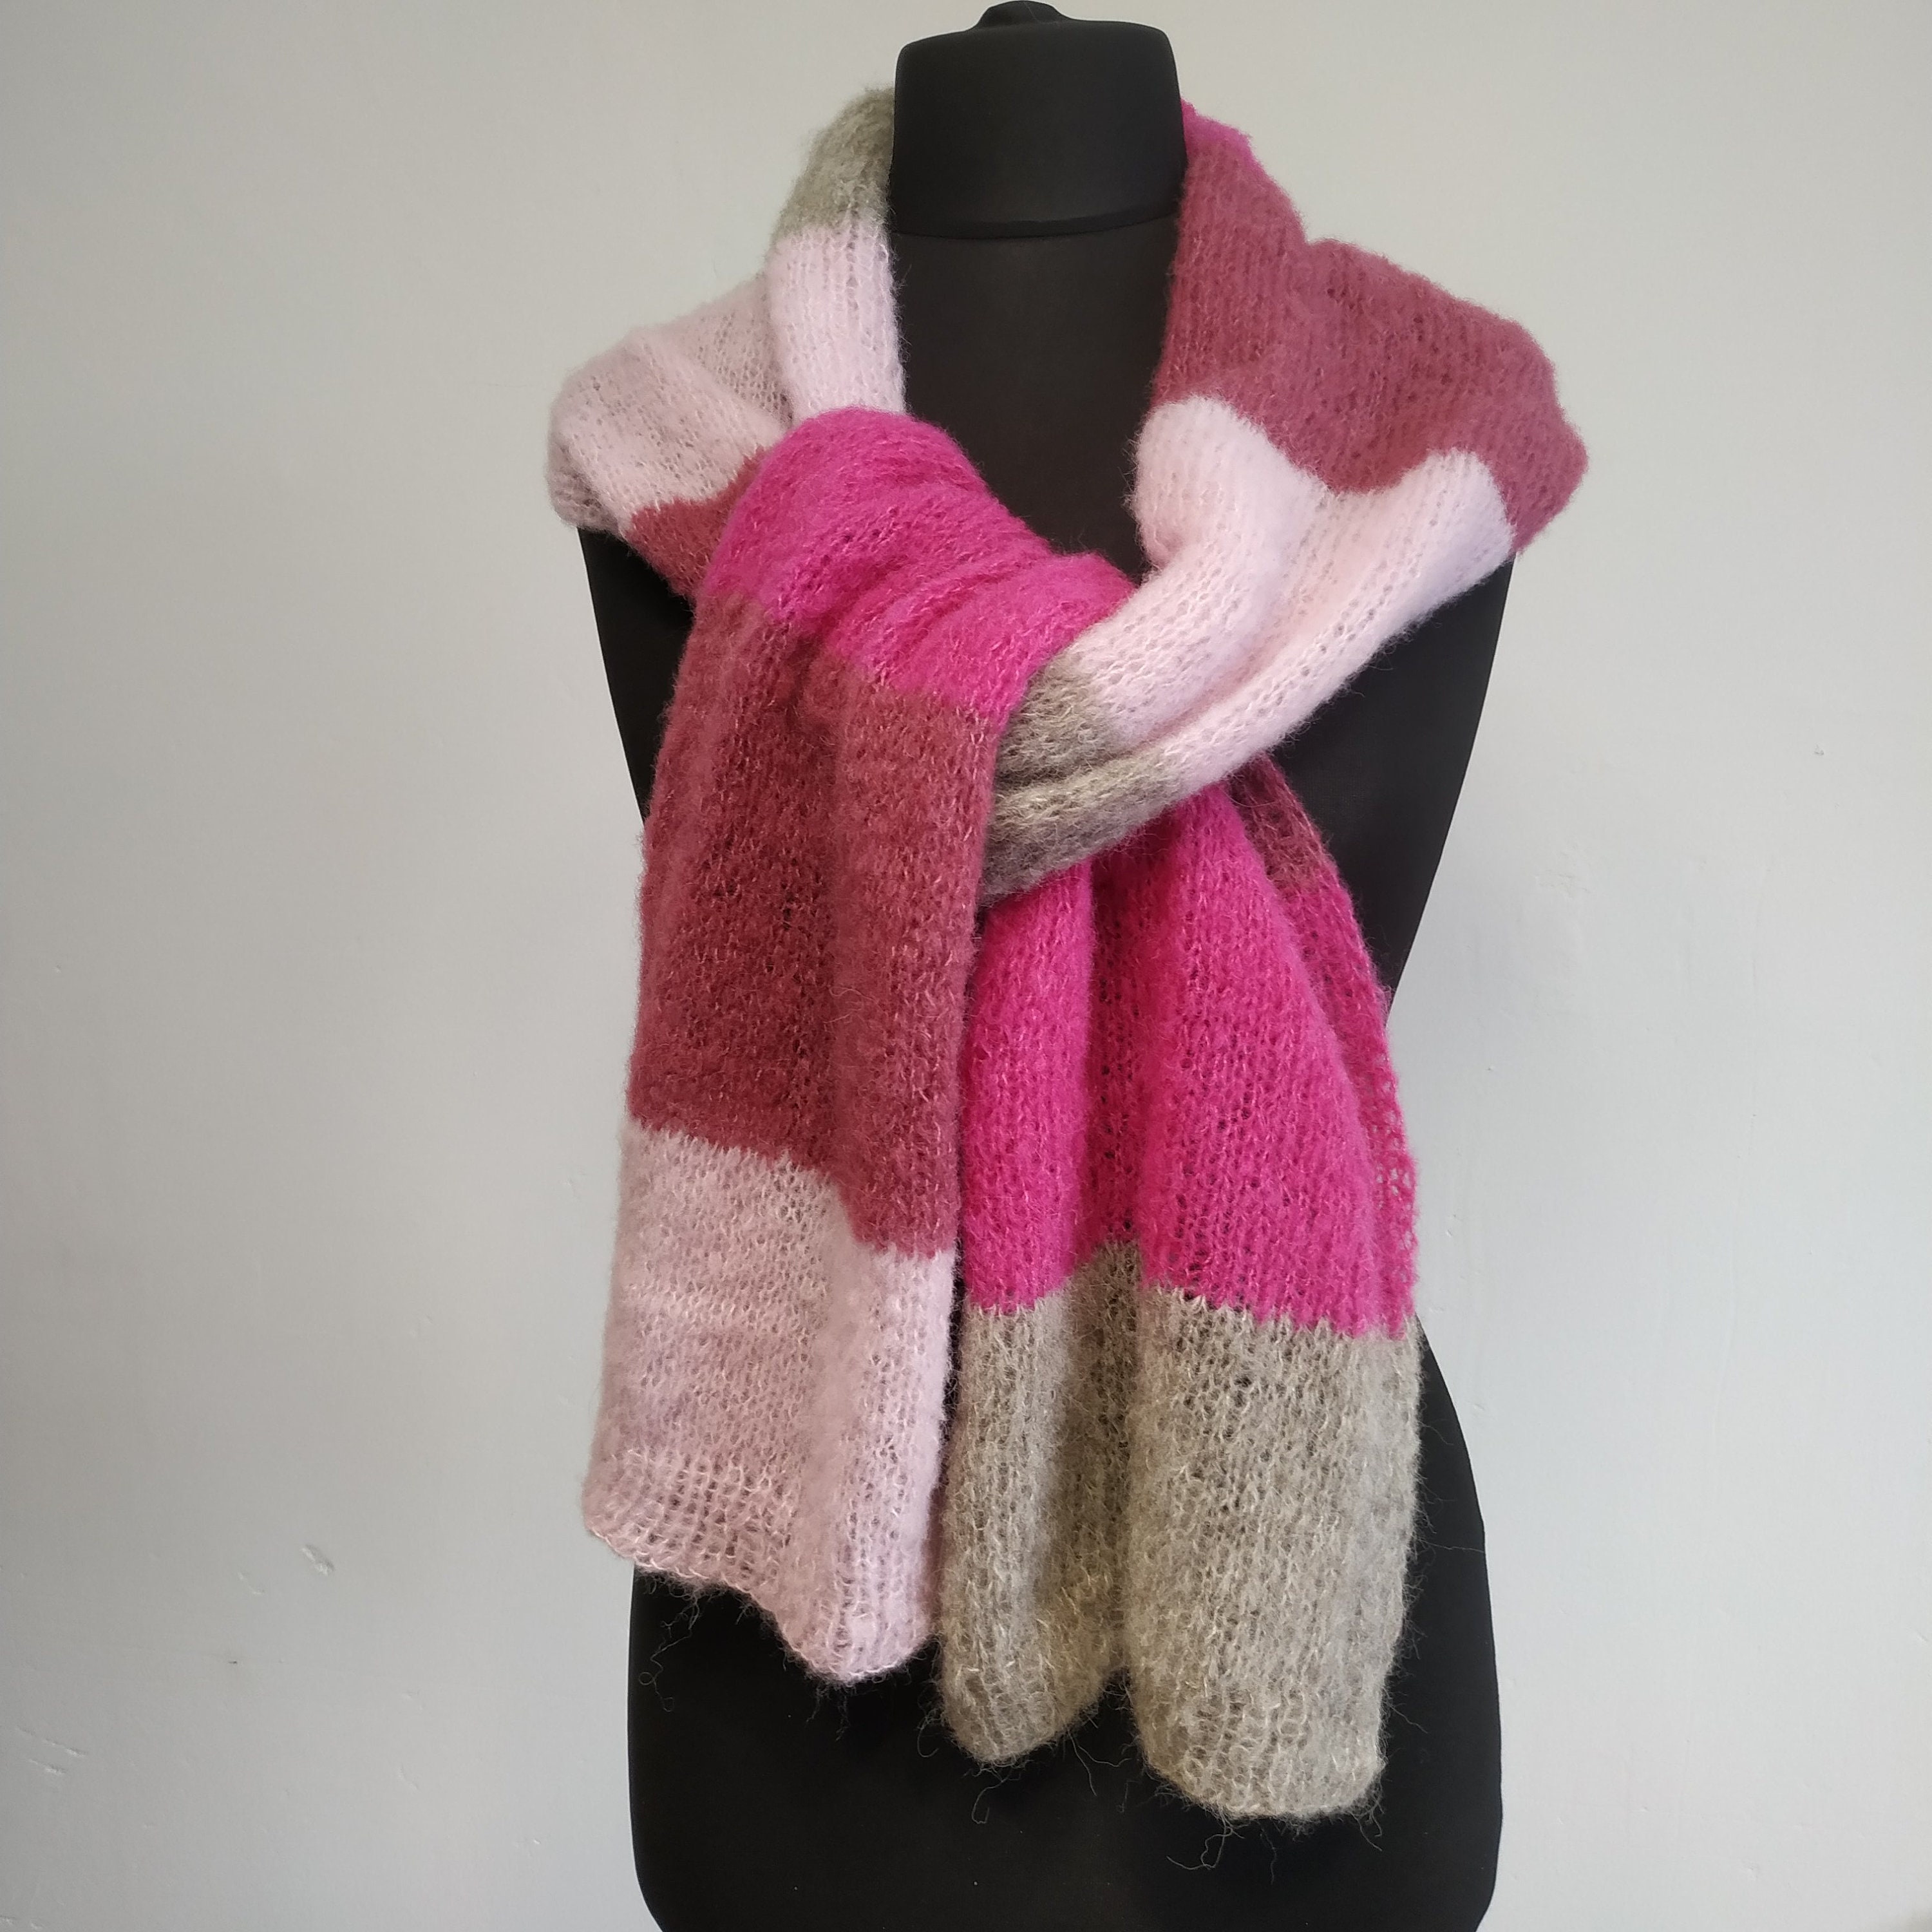 Women's × Barbie Adult Recycled Satin Scarf by Gap Old School Pink One Size